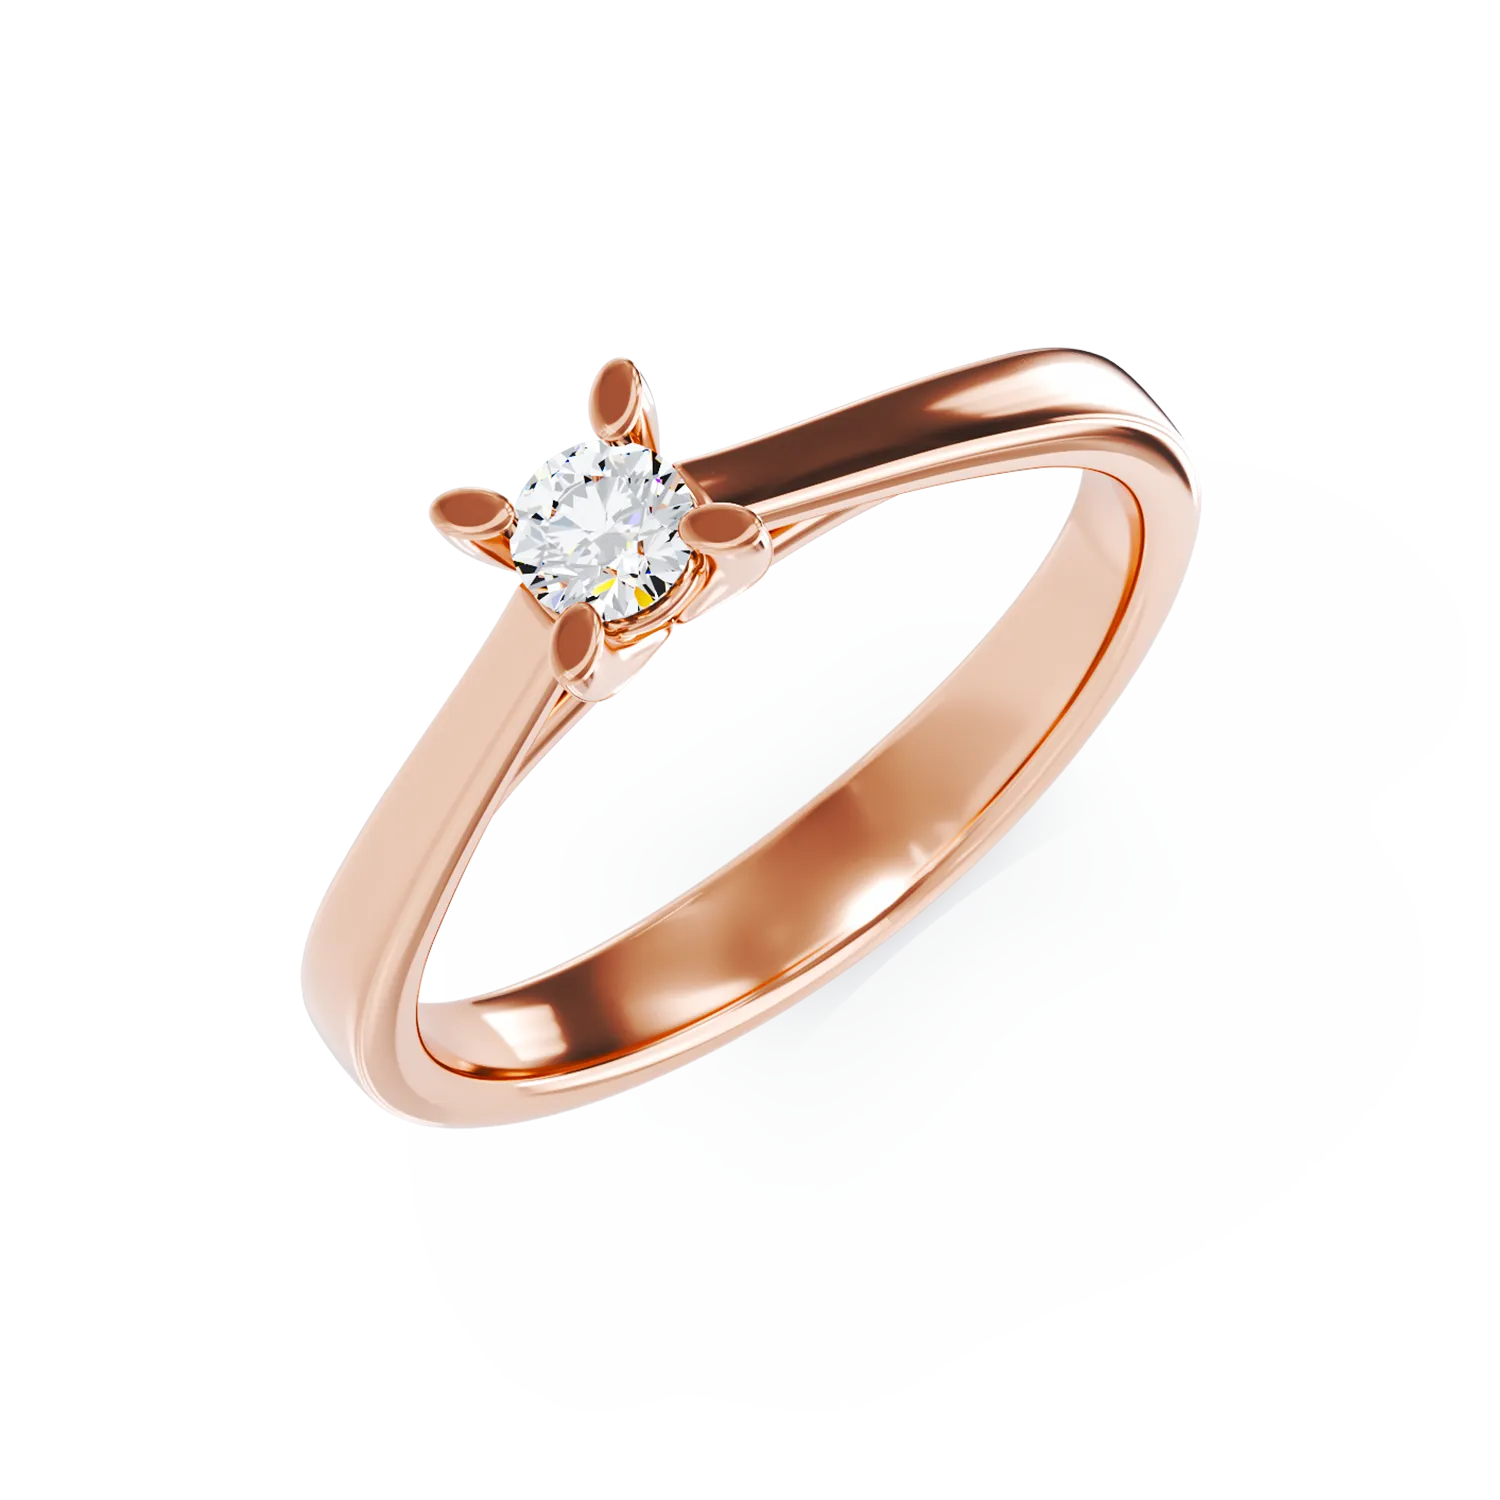 18K rose gold engagement ring with 0.1ct solitaire diamond